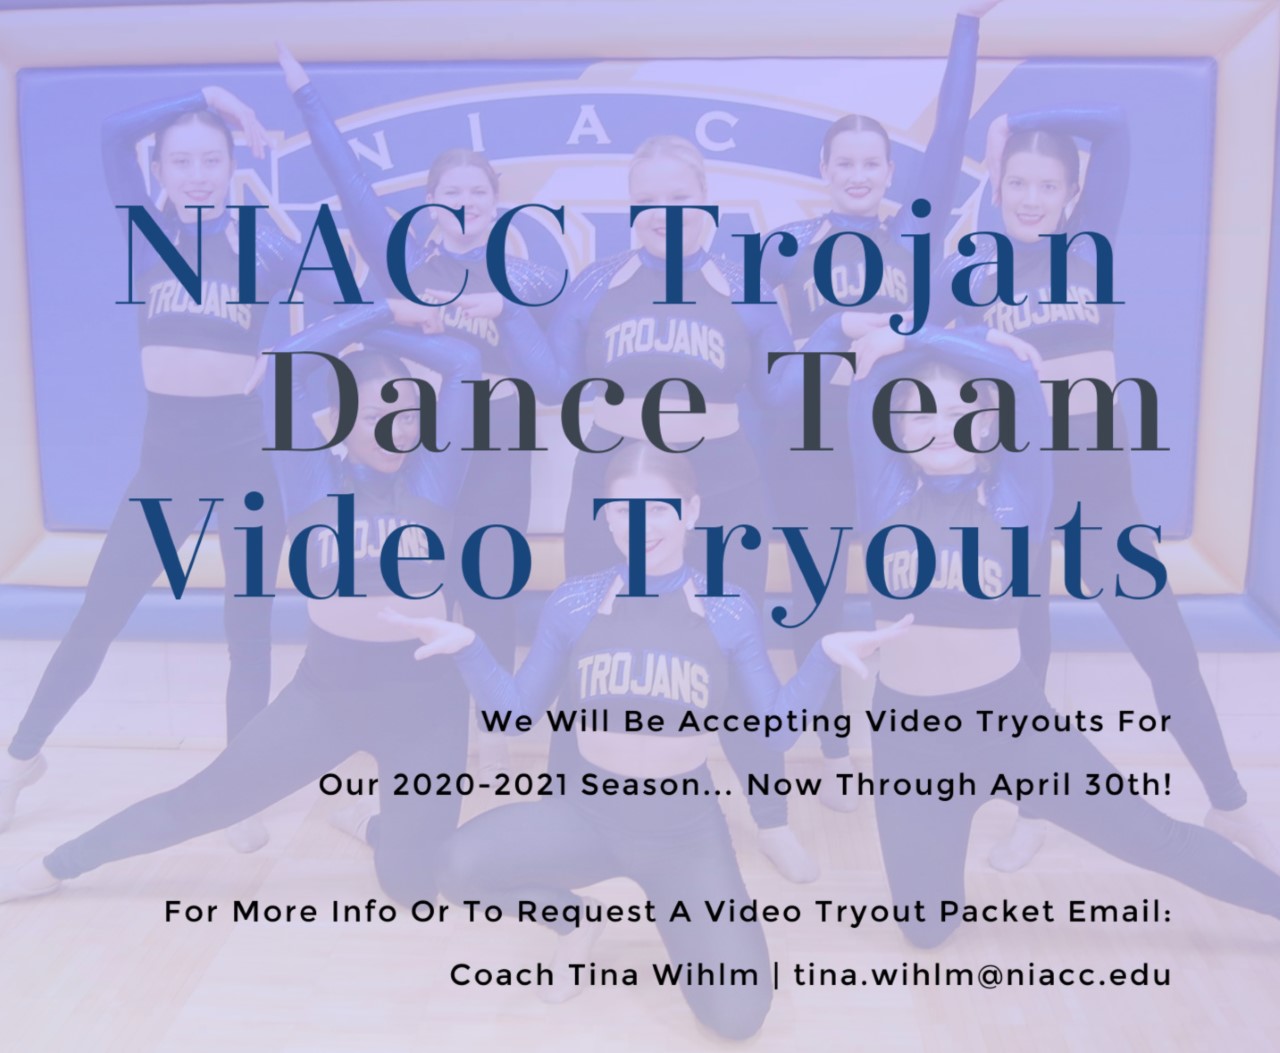 NIACC Dance Team accepting video tryouts